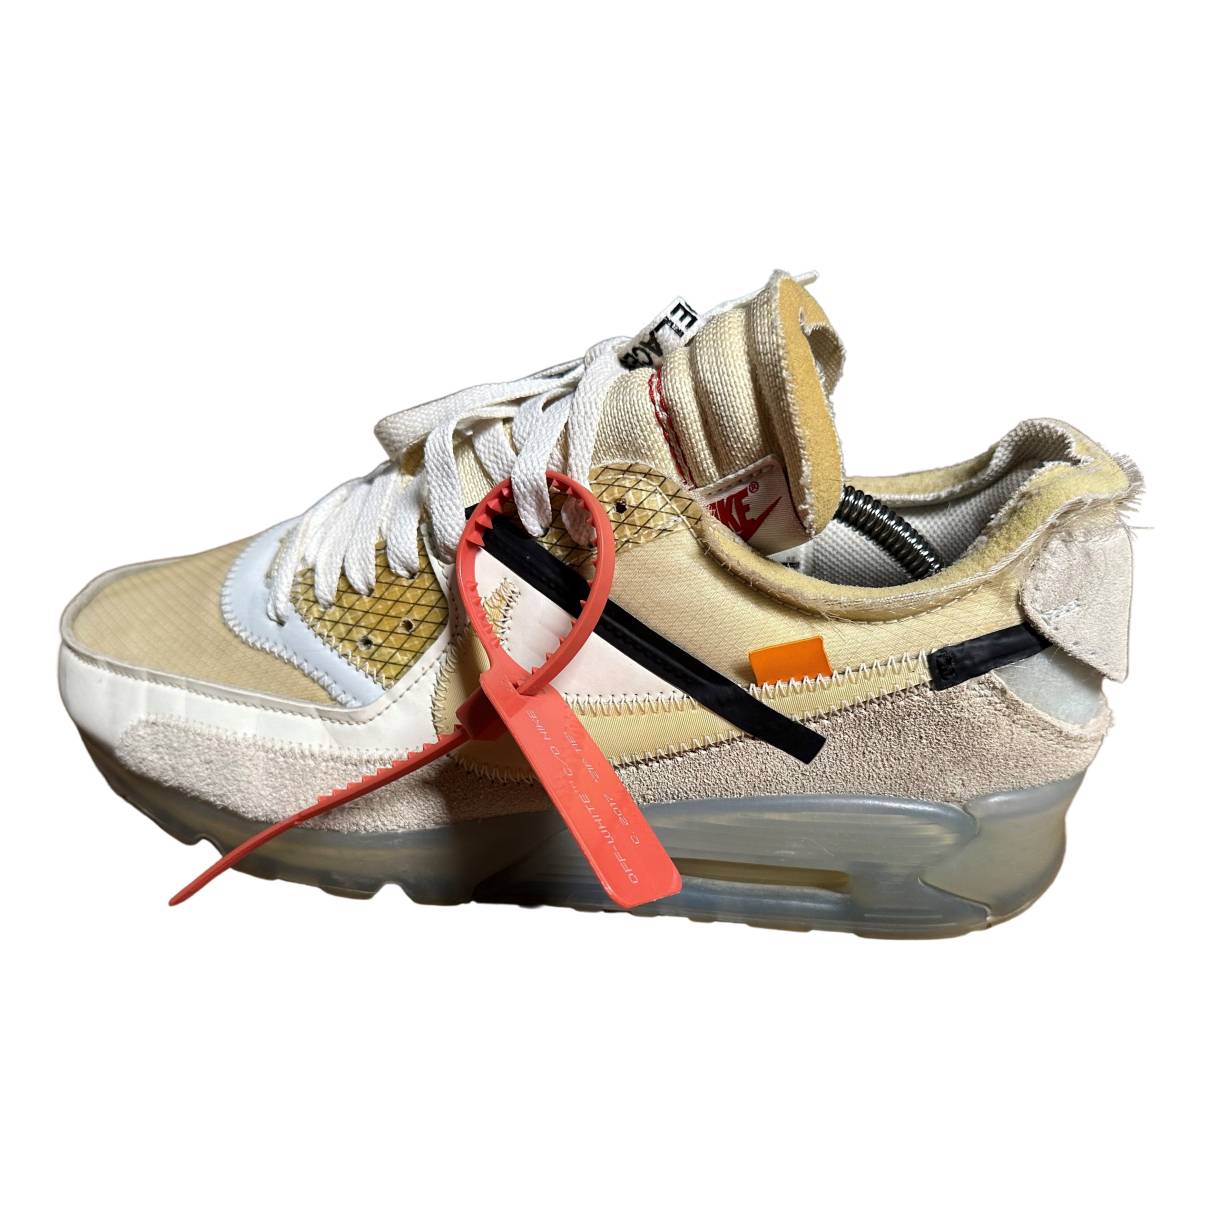 Air max 90 leather low trainers Nike x Off-White Multicolour size 10 US in  Leather - 30014361